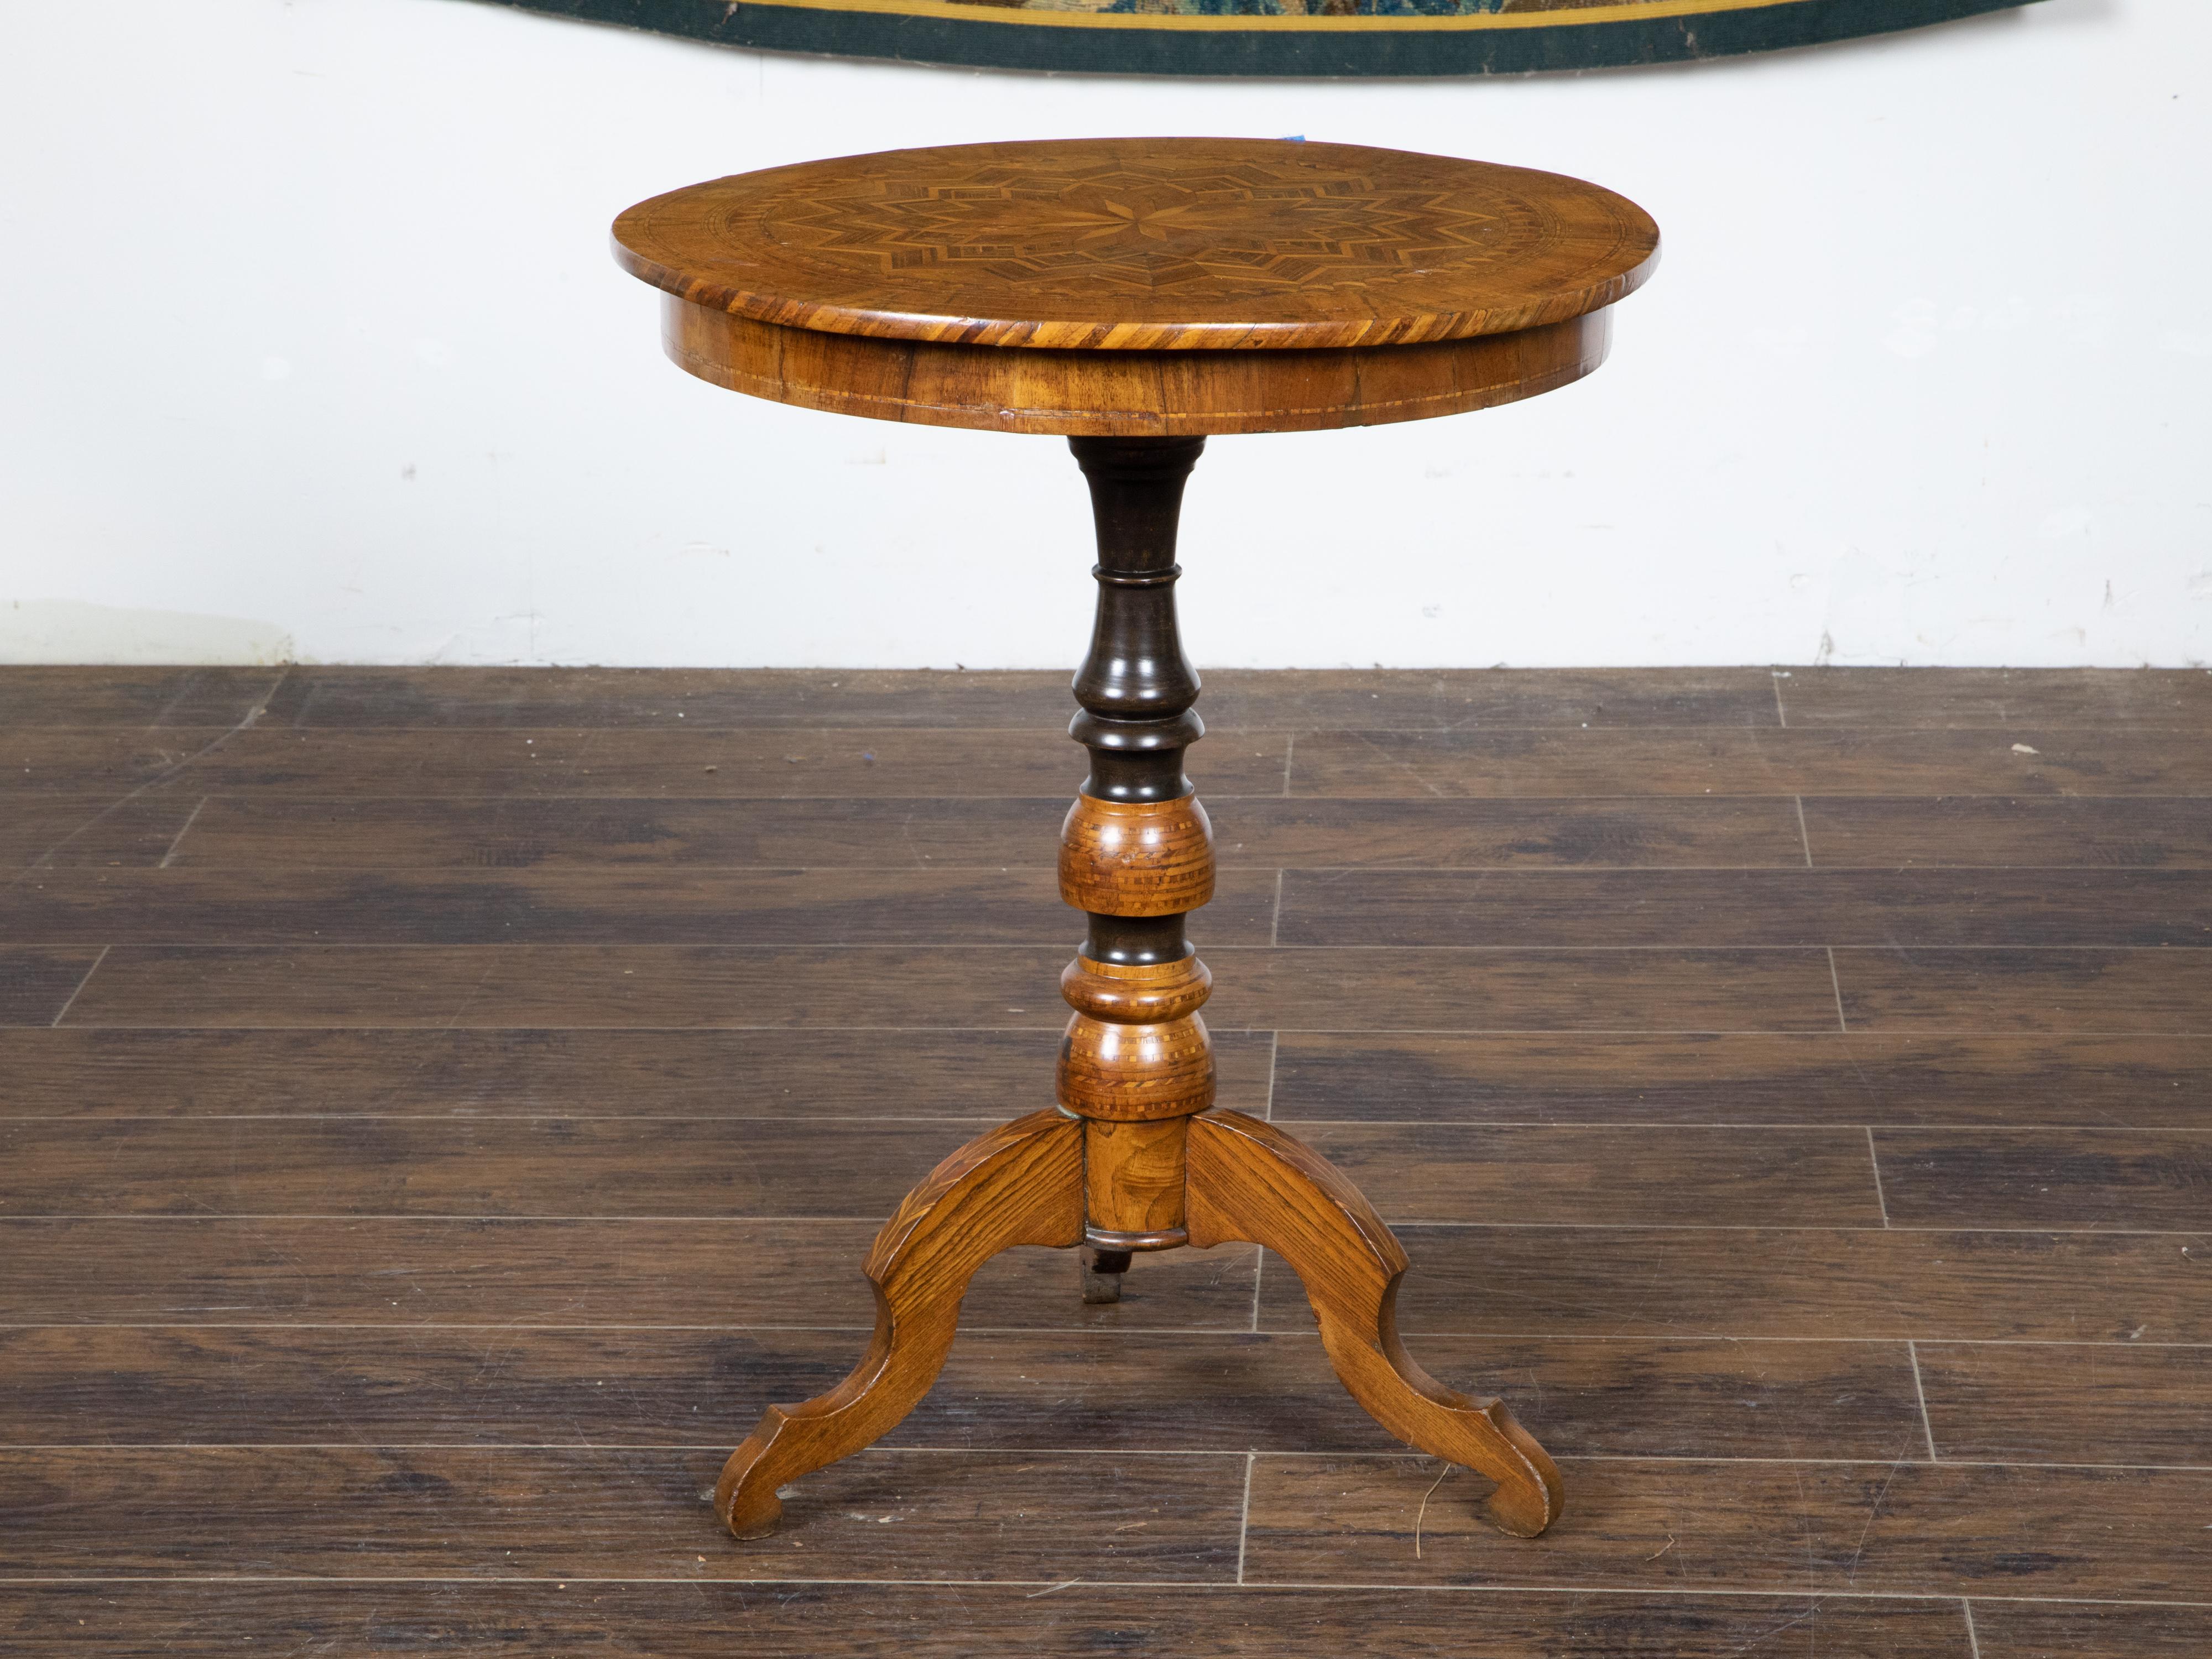 Carved Italian 1890s Walnut Guéridon Table with Marquetry Top and Ebonized Pedestal For Sale